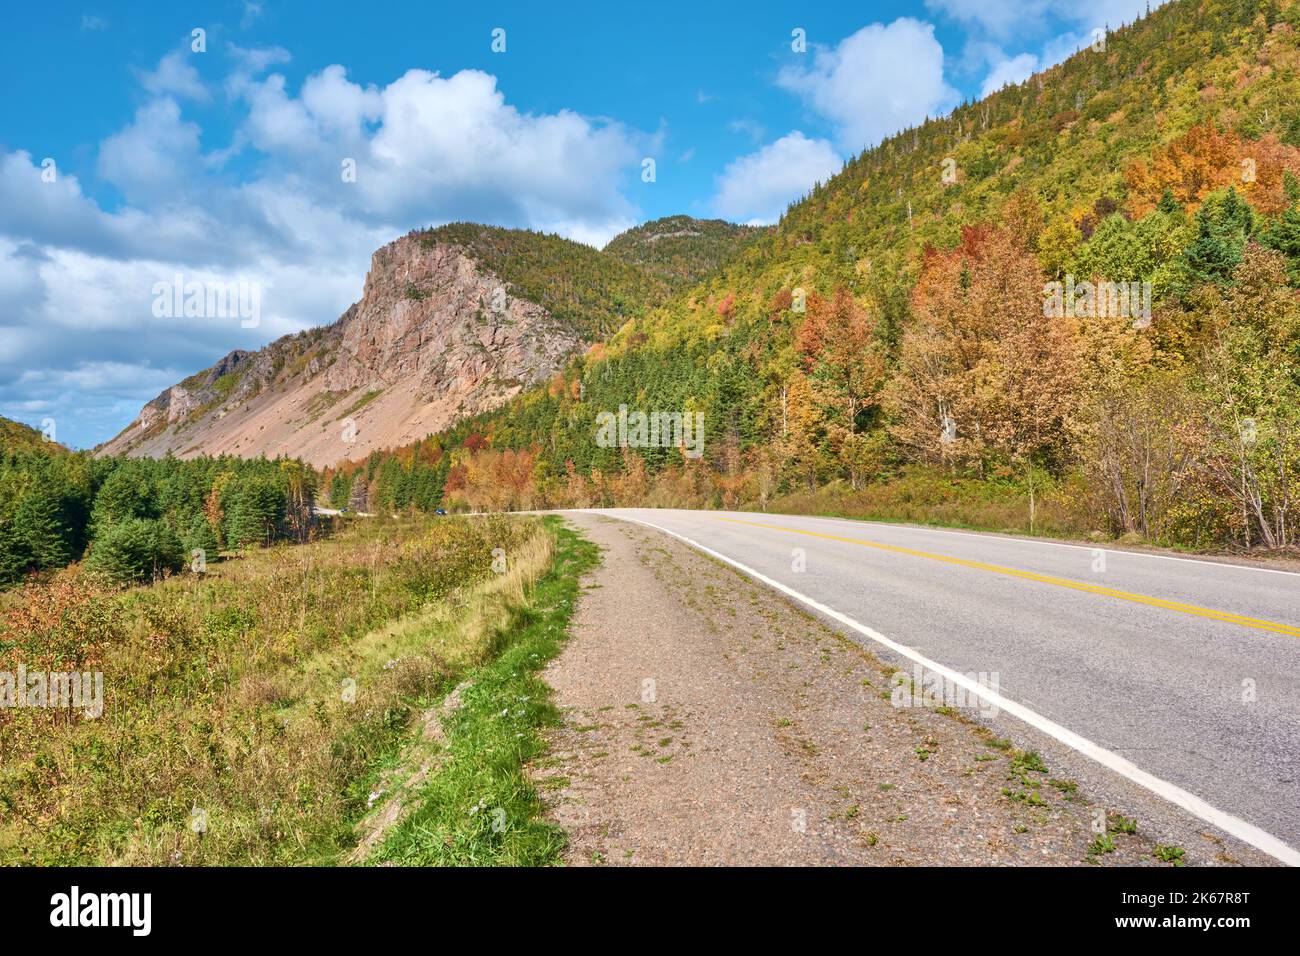 The Cabot Trail is a popular tourist attraction, especially during the autumn when the foliage changes. Stock Photo